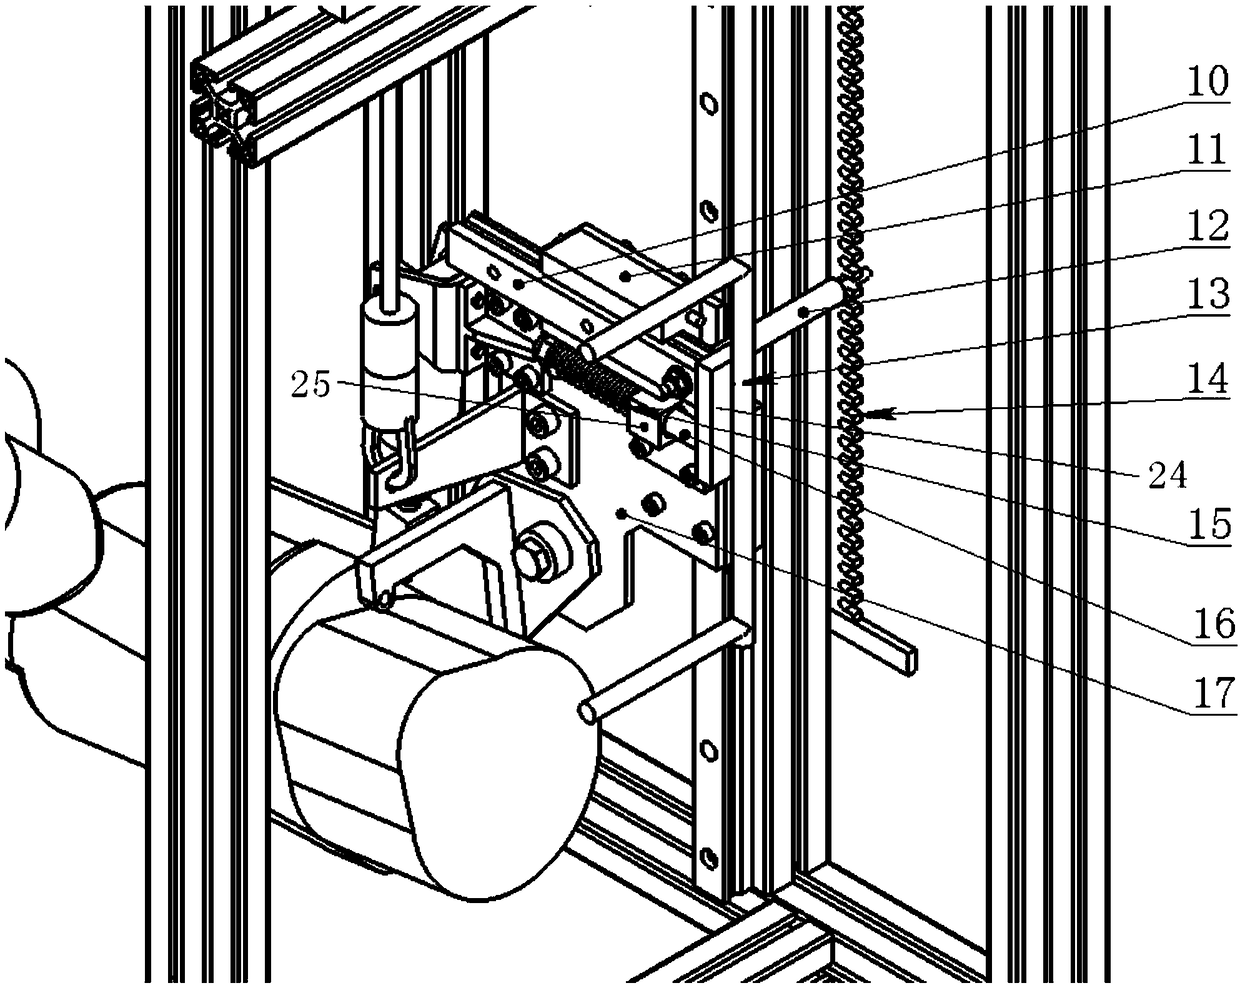 Semi-automatic operating mechanism of air coil nailer